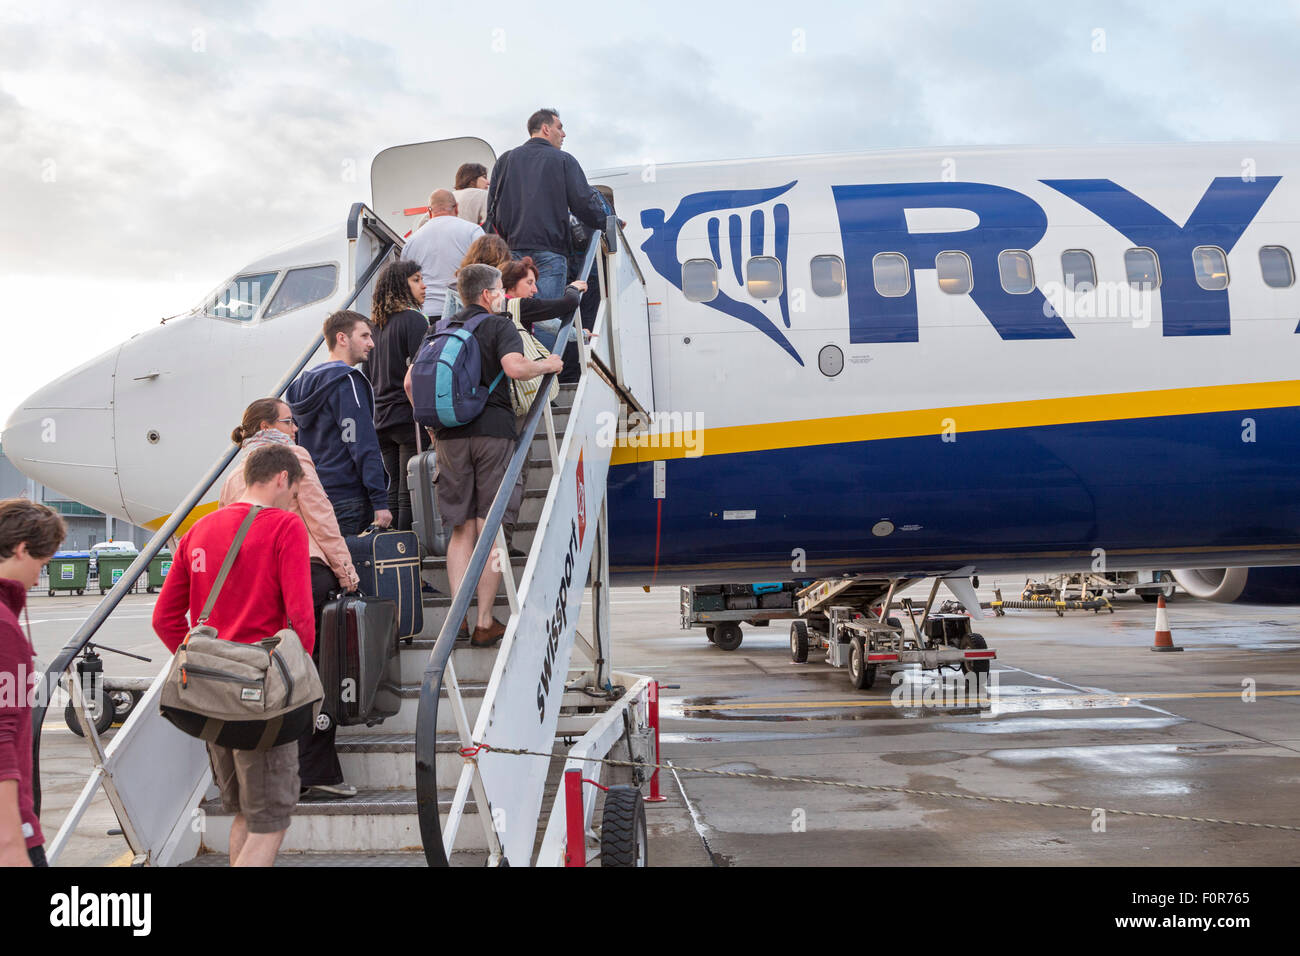 Ryanair passengers departing from Stansted airport, London, United Kingdom Stock Photo